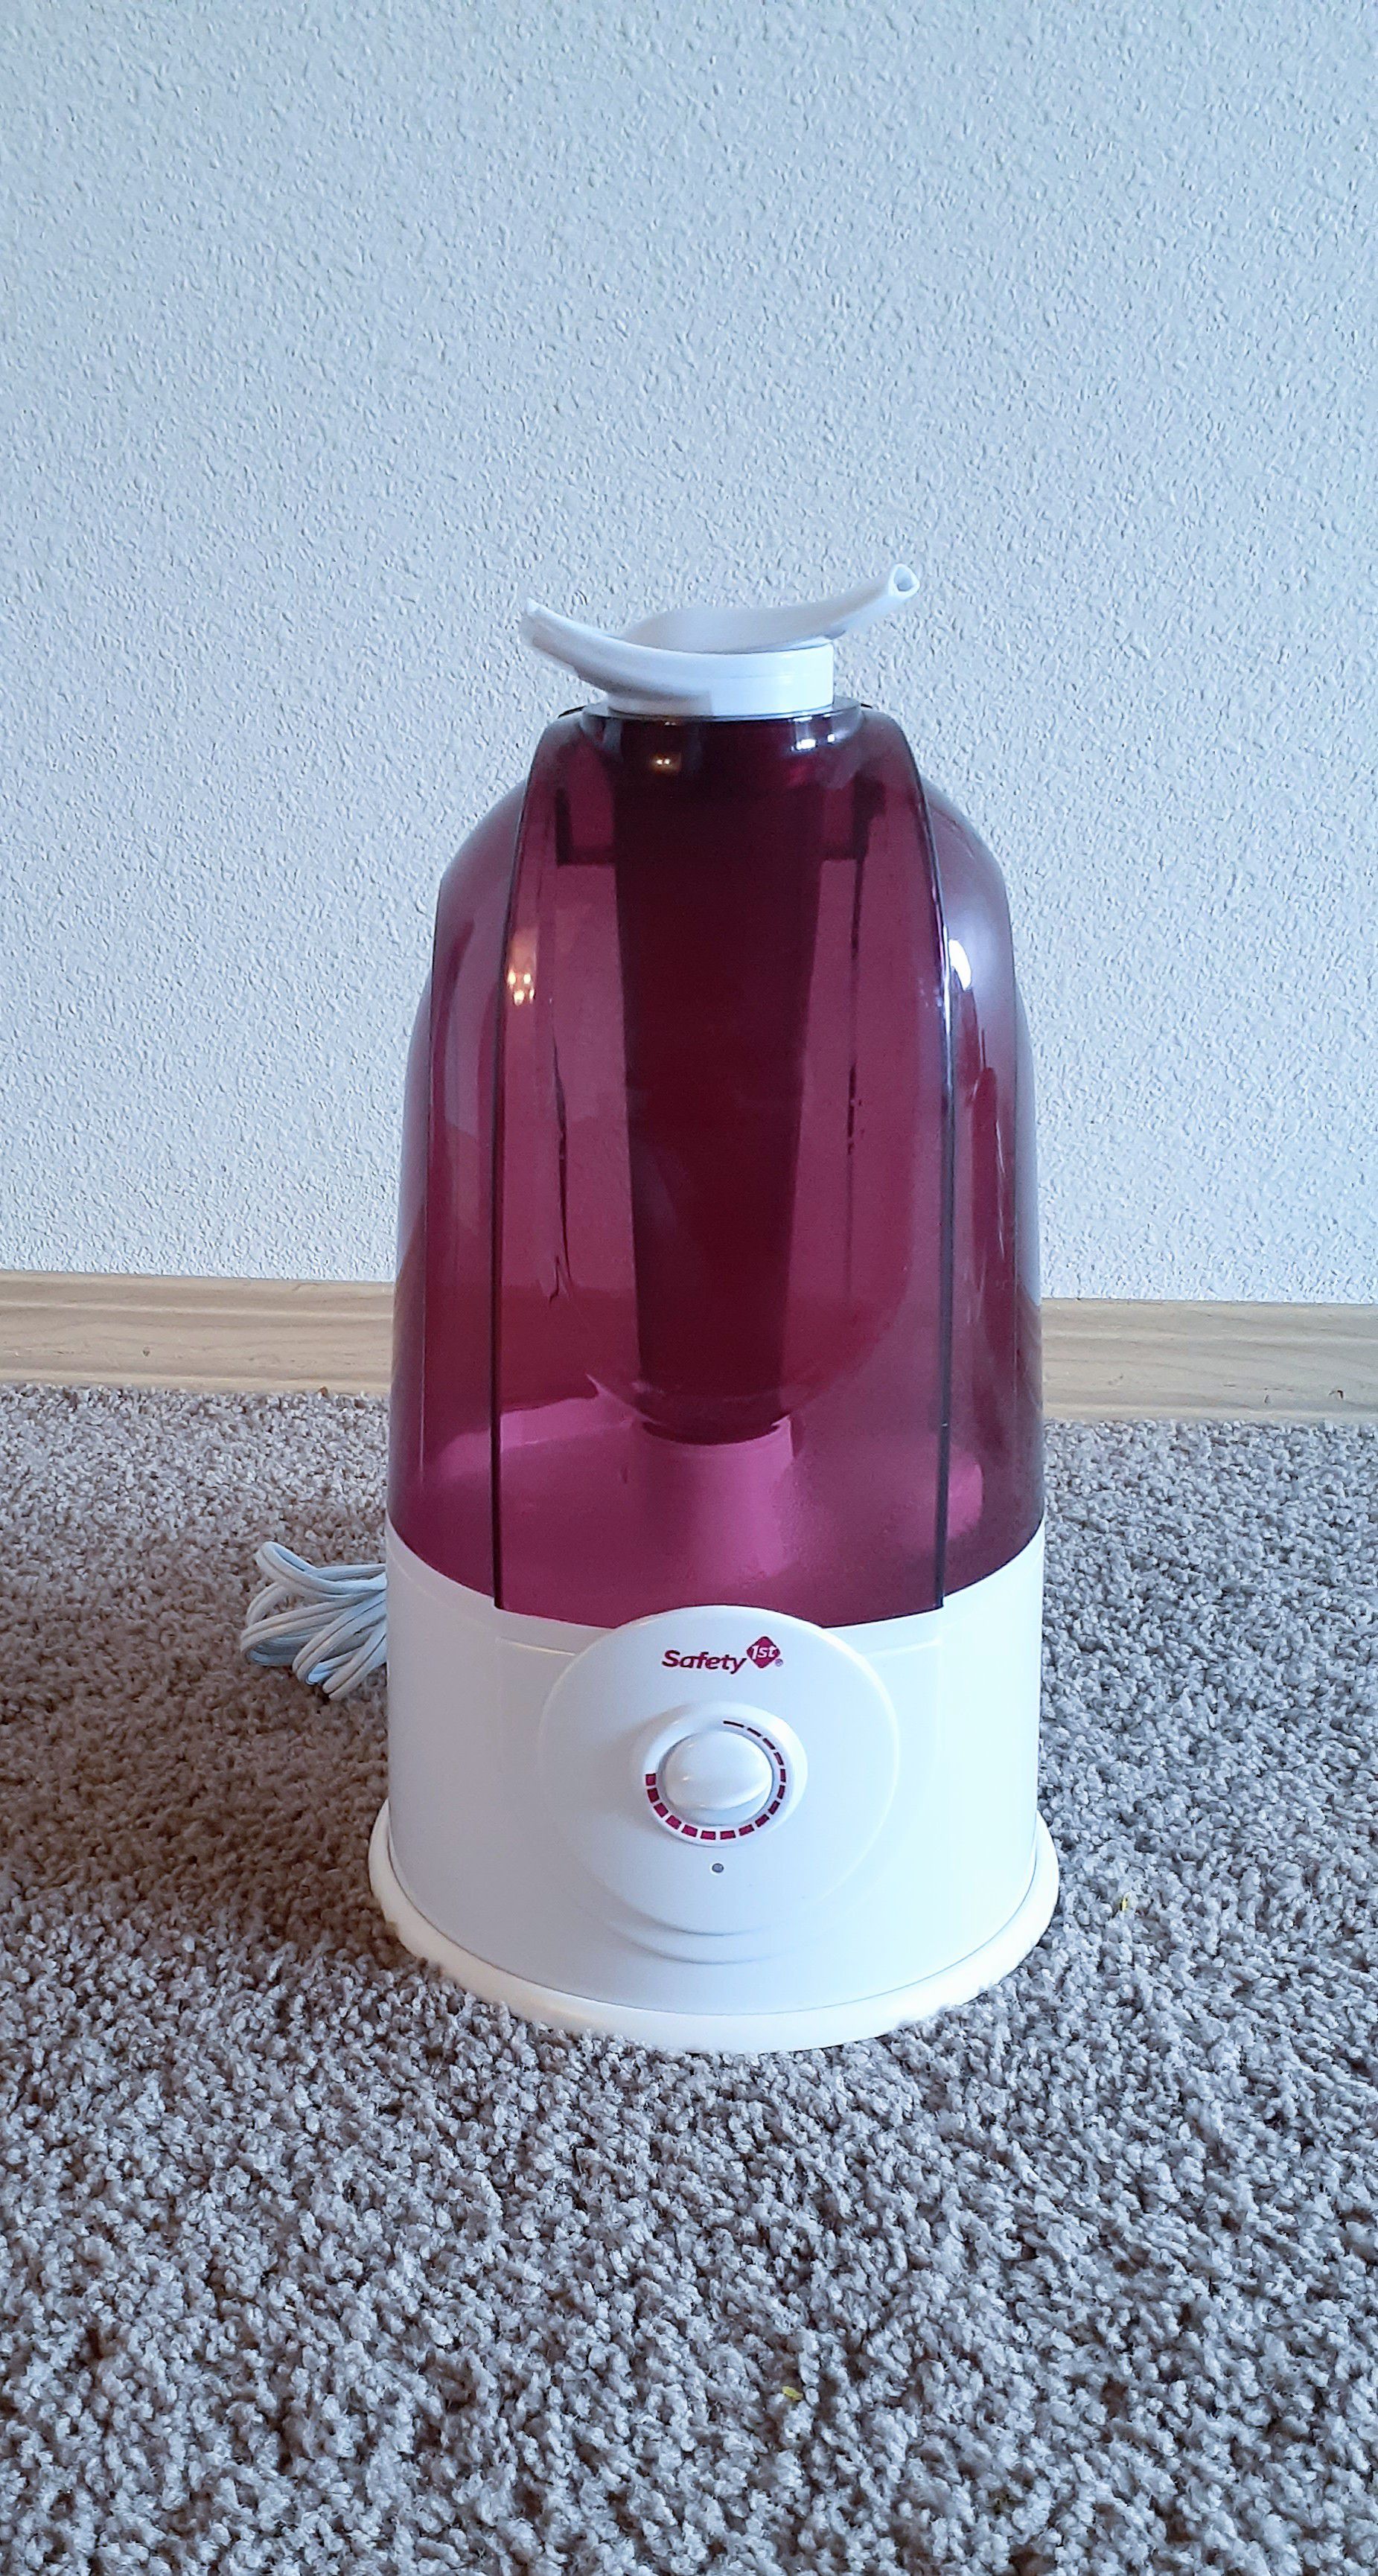 SAFETY 1st Ultrasonic 360 degree cool mist HUMIDIFIER